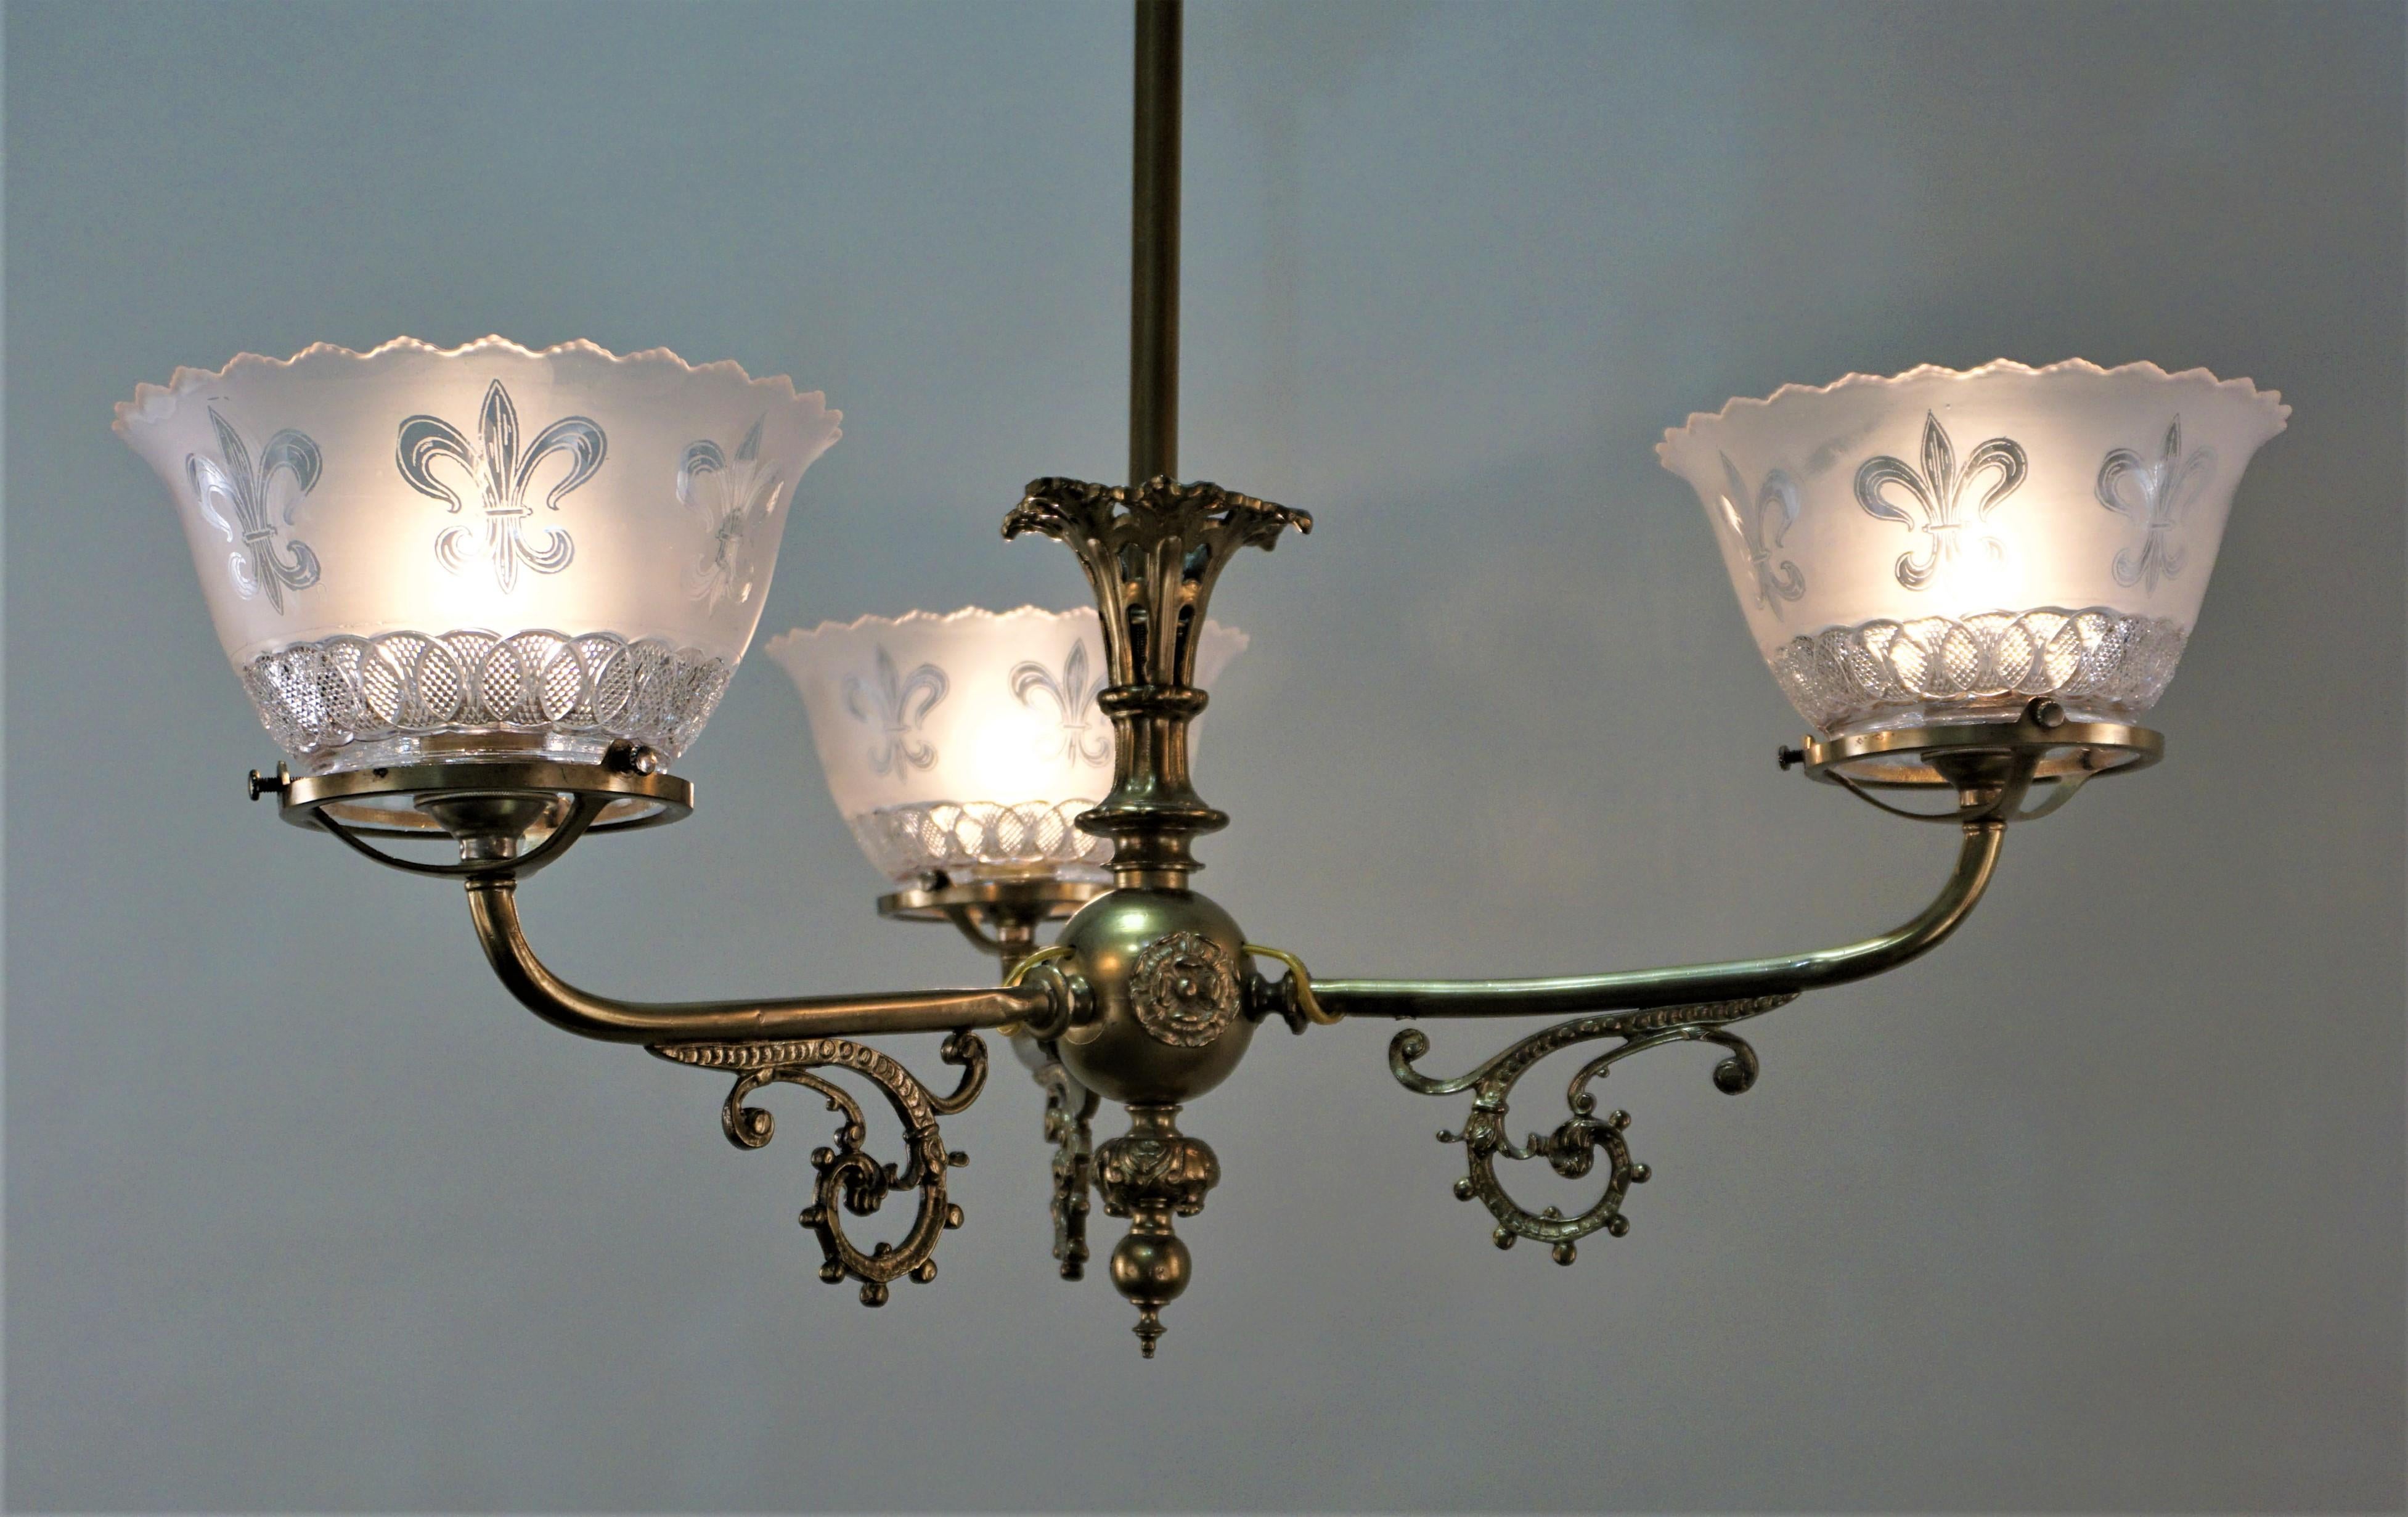 19th century electrified three-arm brass gas chandelier with glass shades.